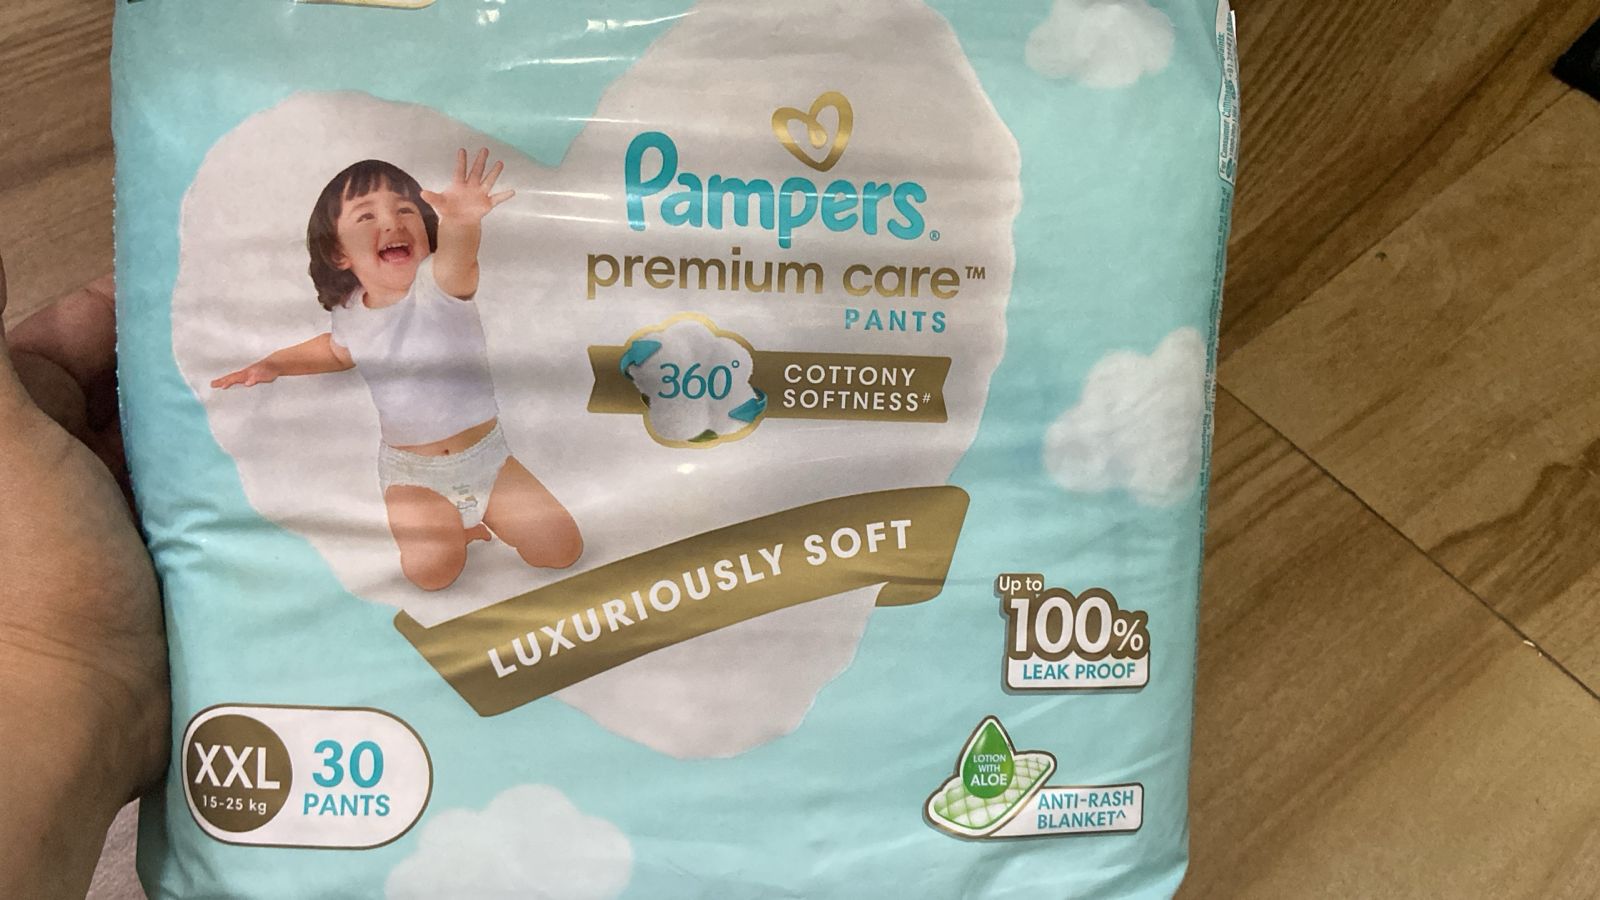 Buy Pampers Premium Care Pants - M Medium Size Baby Diapers, Softest Ever Pampers  Pants, 7-12 Kg Online at Best Price of Rs 3637 - bigbasket